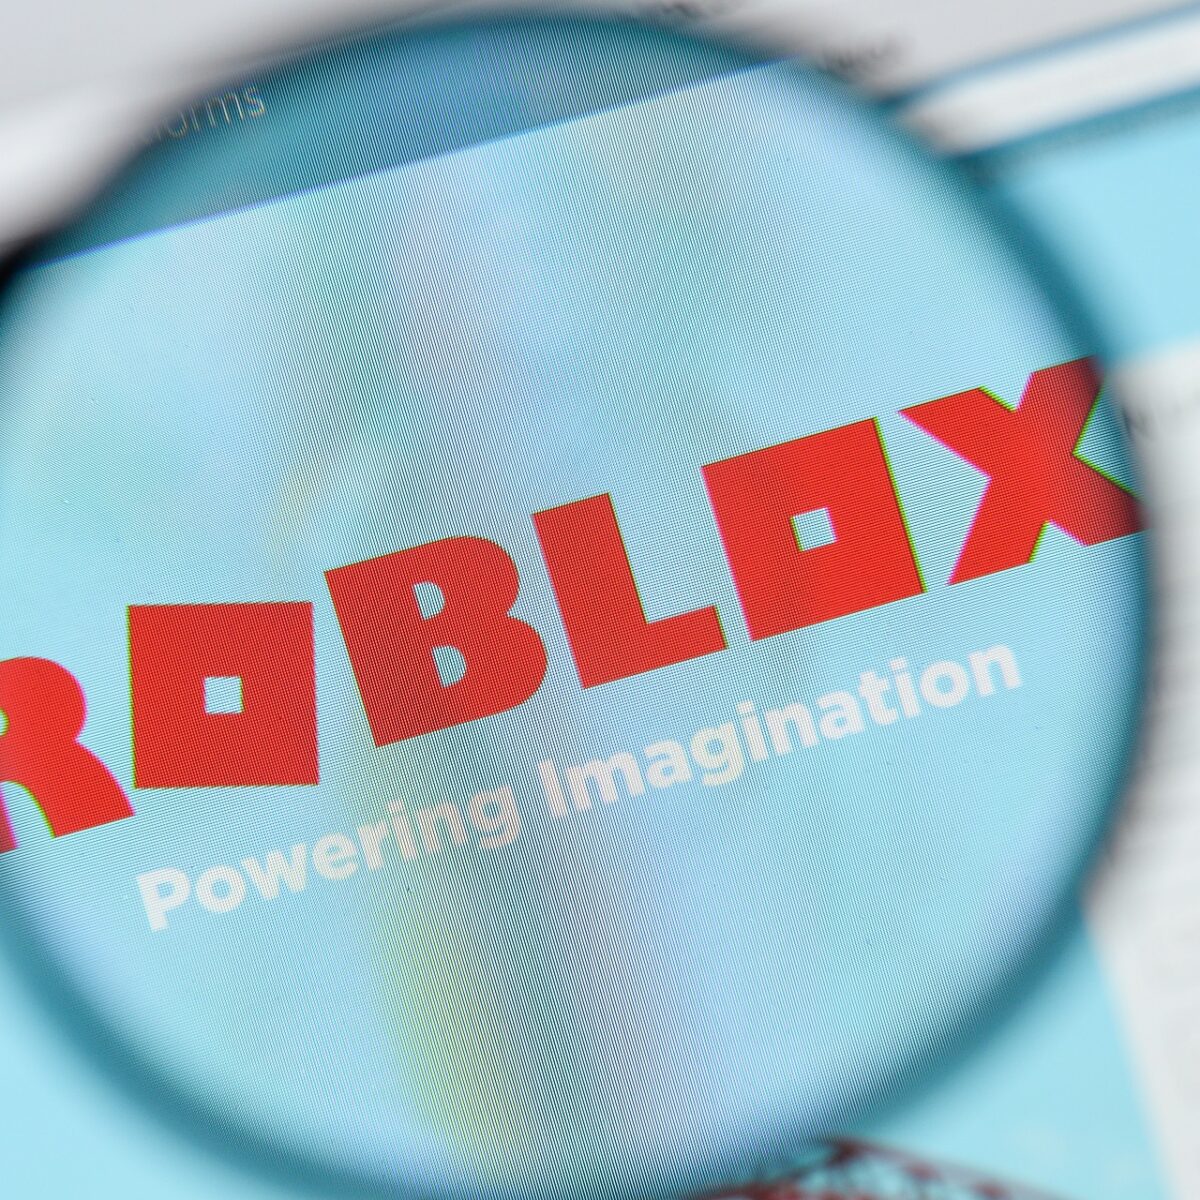 Fix Your Browser Is Not Supported Roblox Error - your browser is not supported roblox error fix it now